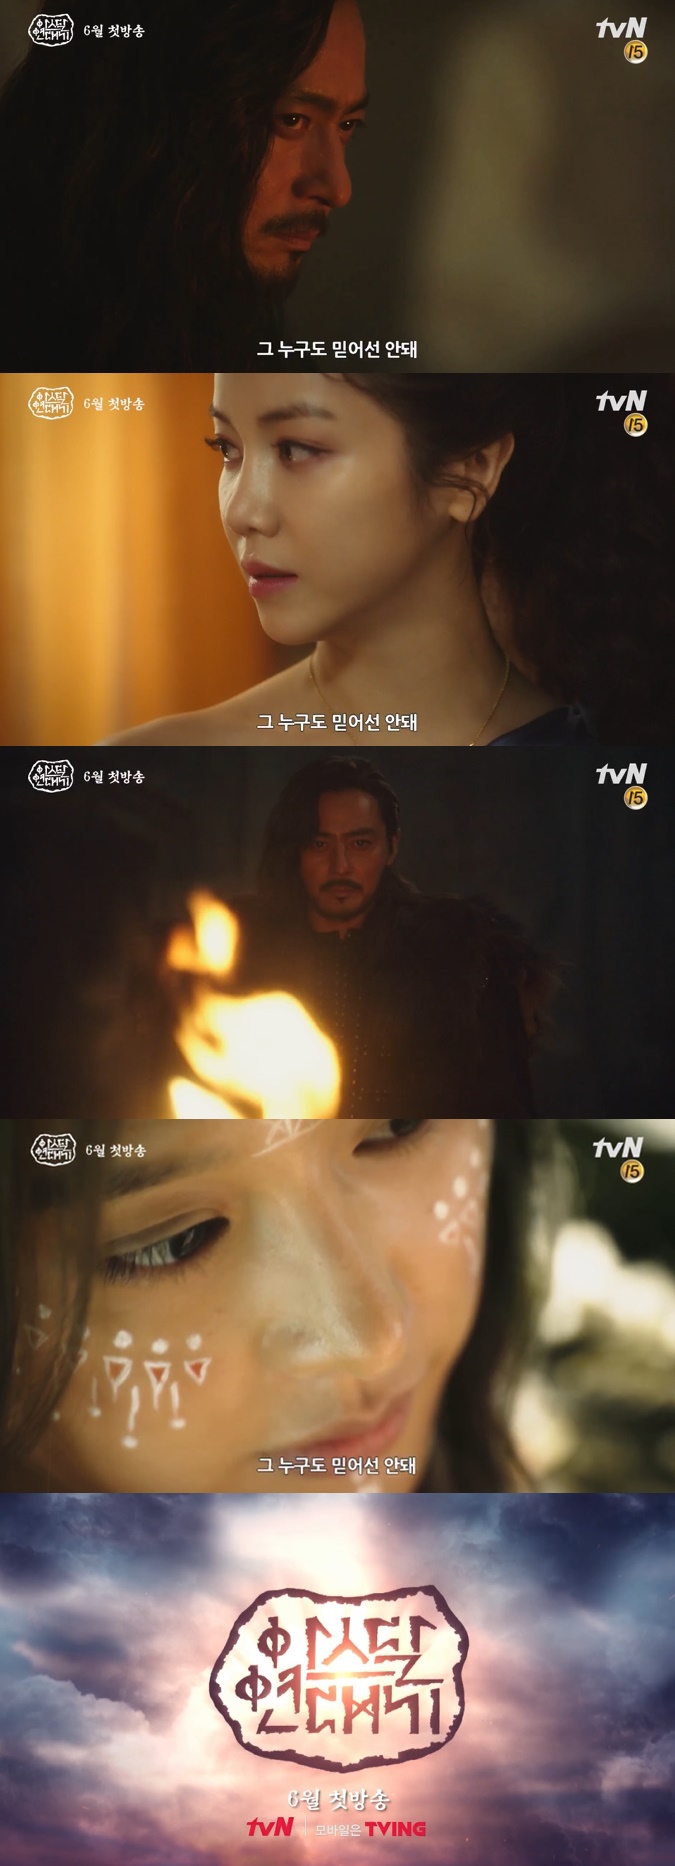 The Asdal Chronicles released its first teaser video.On the 12th, TVNs new Saturday drama Asdal Chronicles (playplayed by Kim Young-hyun and Park Sang-yeon, and directed by Kim Won-seok) released their first teaser video.The public images show the main Actors Jang Dong-gun, Song Joong-ki, Kim Ji-won and Kim Ok-bin.In the video, along with the appearance of Jang Dong-gun, who was divided into the background of the appeal era, he starts with a scene asking, Targon, where is he?In addition, Song Joong-ki of Eunseom Station was shown as Asdal. In addition, Kim Ji-won of Tanya Station and Kim Ok-bin of Taealha Station showed meaningful eyes.Here, I was curious about the phrase This is the beginning of everything, If you live, you will become a legend, Desire to be filled with life, and No one should believe it.Asdal Chronicle is an ancient human history fantasy drama about the civilization and the story of the state of the era.Kim Won-seok PD, who directed microbial, signal and my uncle, and Kim Young-hyun, who wrote deep-rooted tree and Kwon Ryong-i Narsa, coincided.Especially, it is attracting attention as the first attempt to draw a mythical story of the Korean peninsula with colorful cast members such as Jang Dong-gun, Song Joong-ki, Kim Ji-won and Kim Ok-bin.The Asdal Chronicles is scheduled to air in June following Confessions.